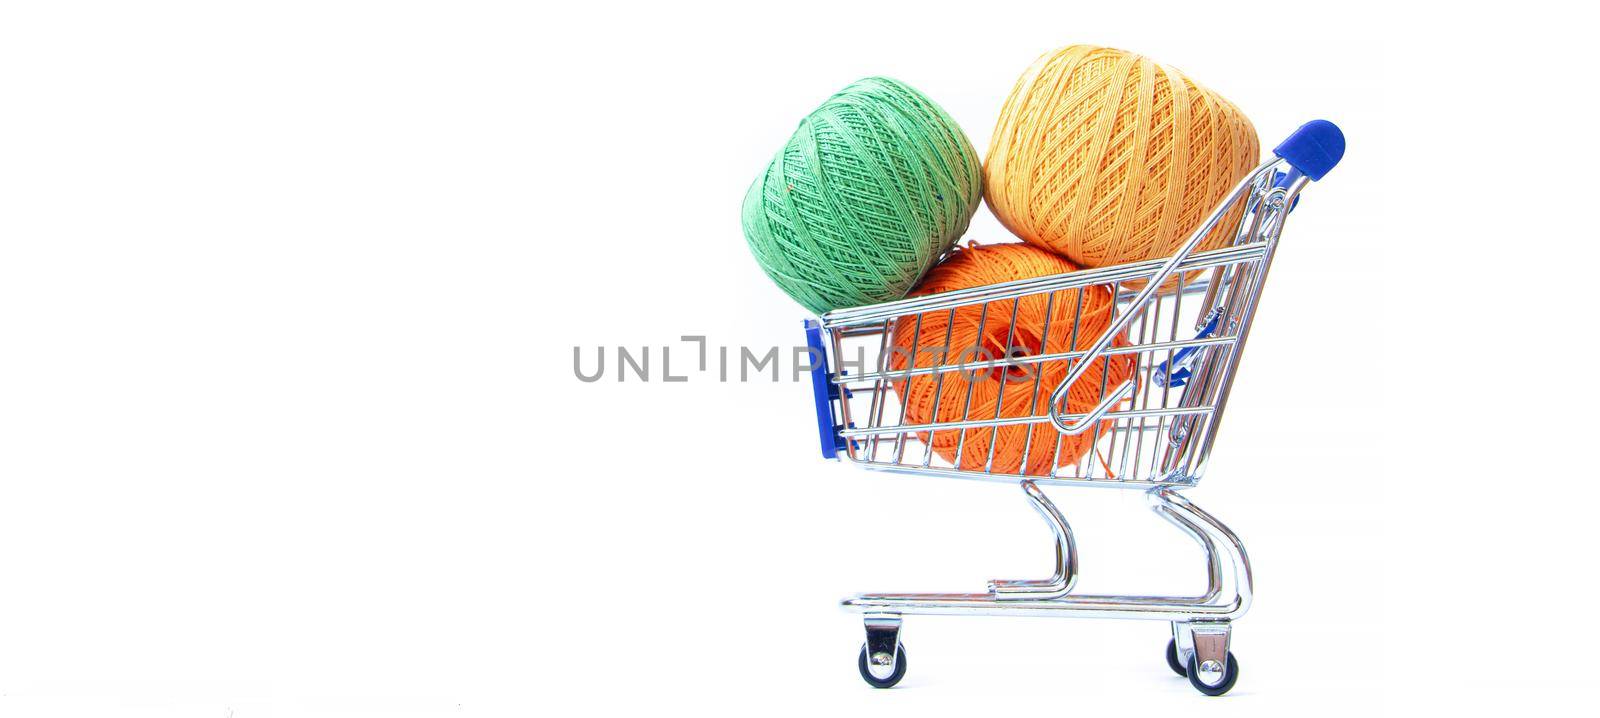 Trolley with yarn for knitting. Yarn for crocheting. Design of the embroidery section. Needlework. Hobbies and recreation. Colored threads on a white background. Isolated objects. Copy space